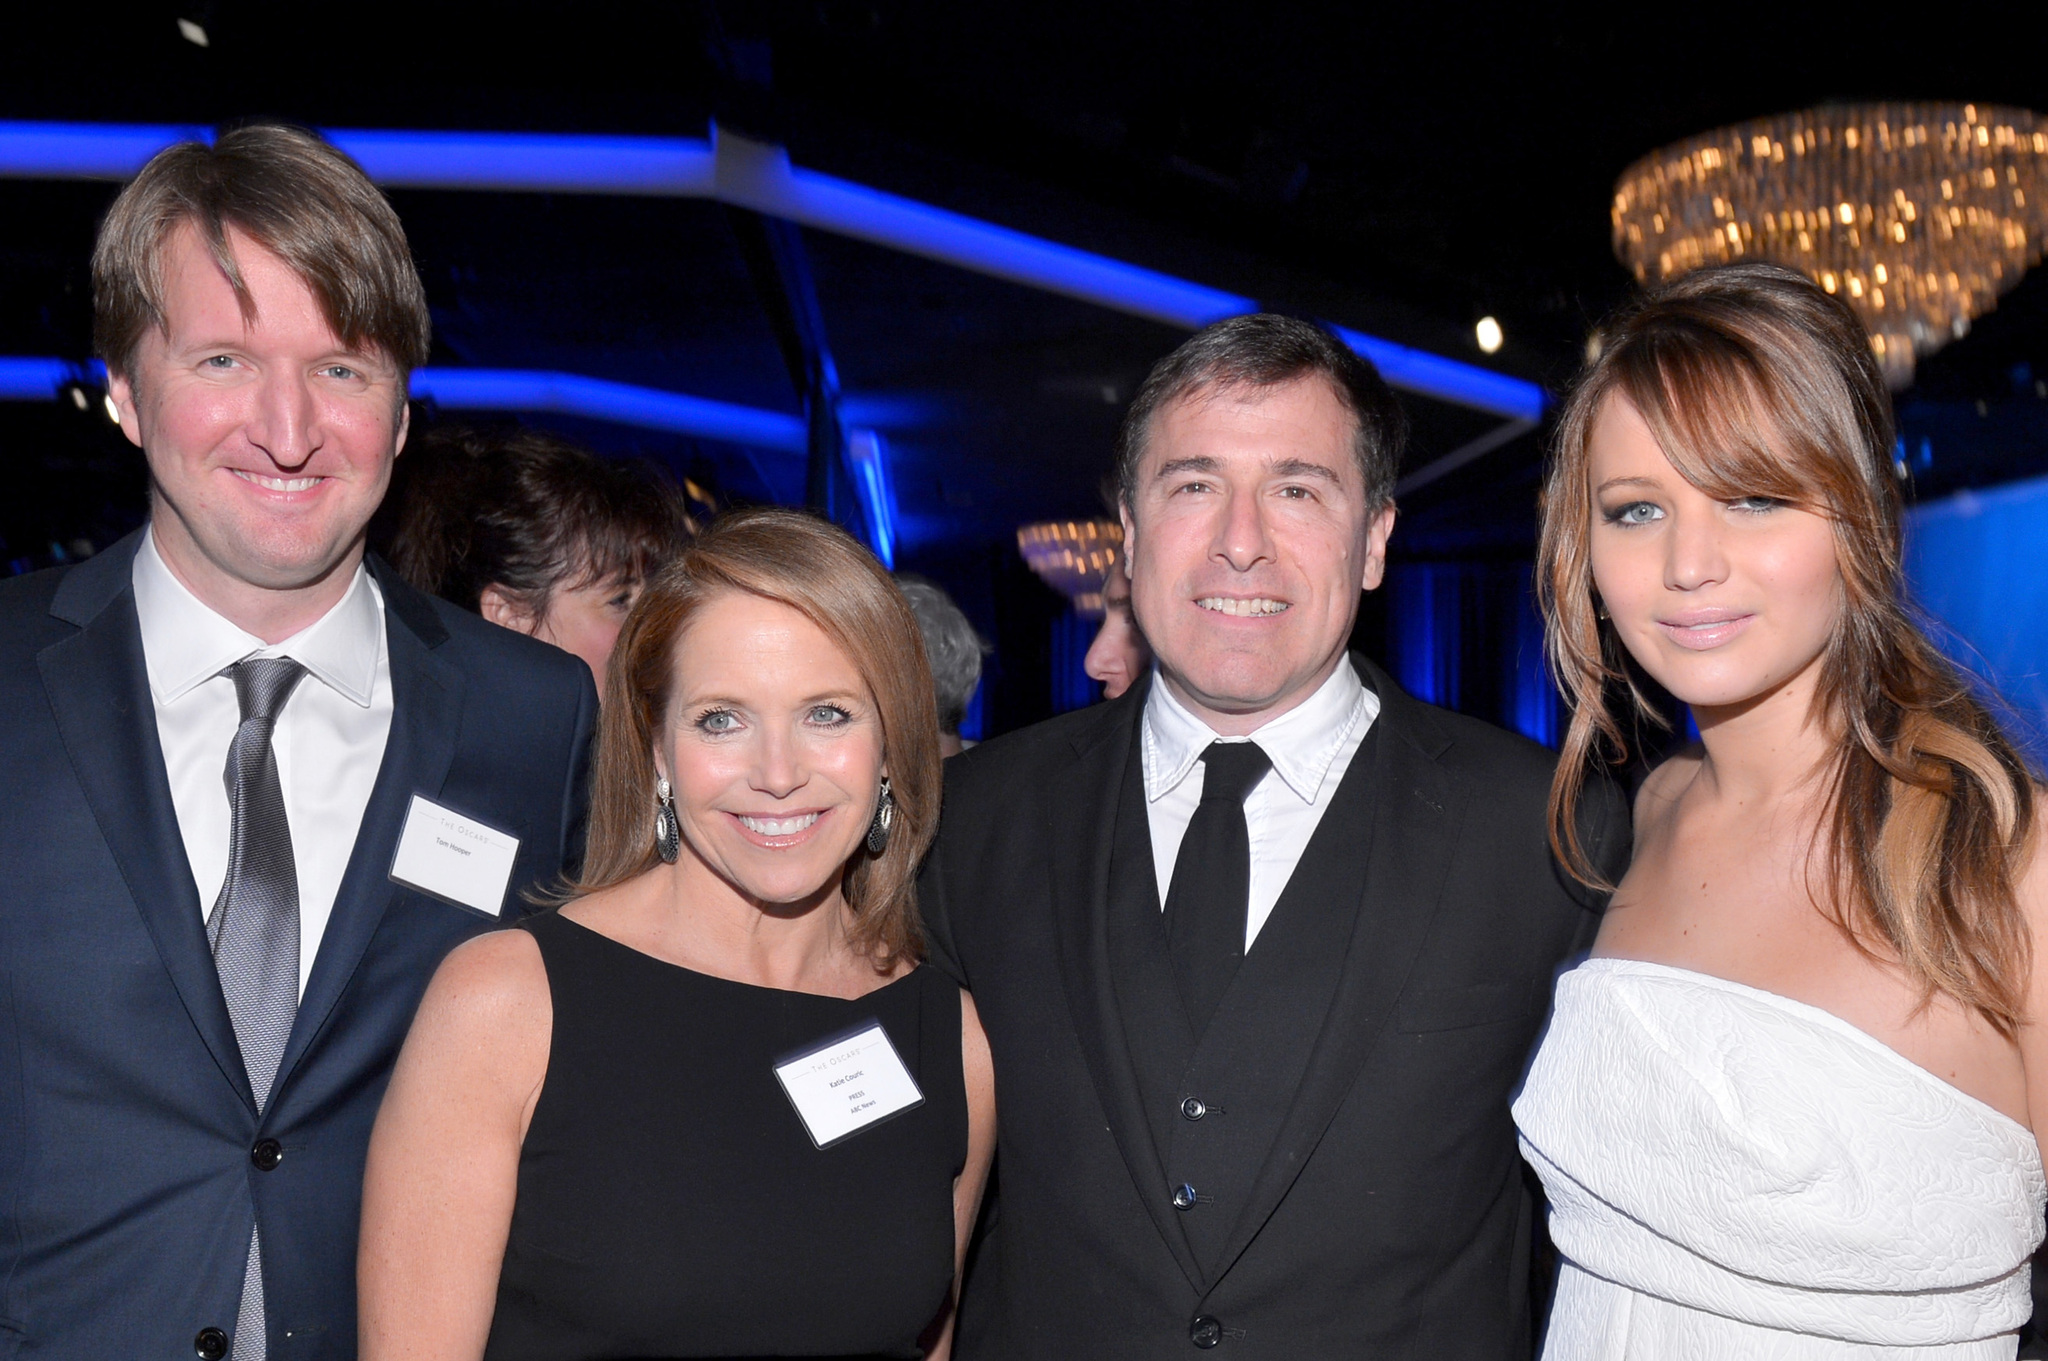 Katie Couric, Tom Hooper, David O. Russell and Jennifer Lawrence